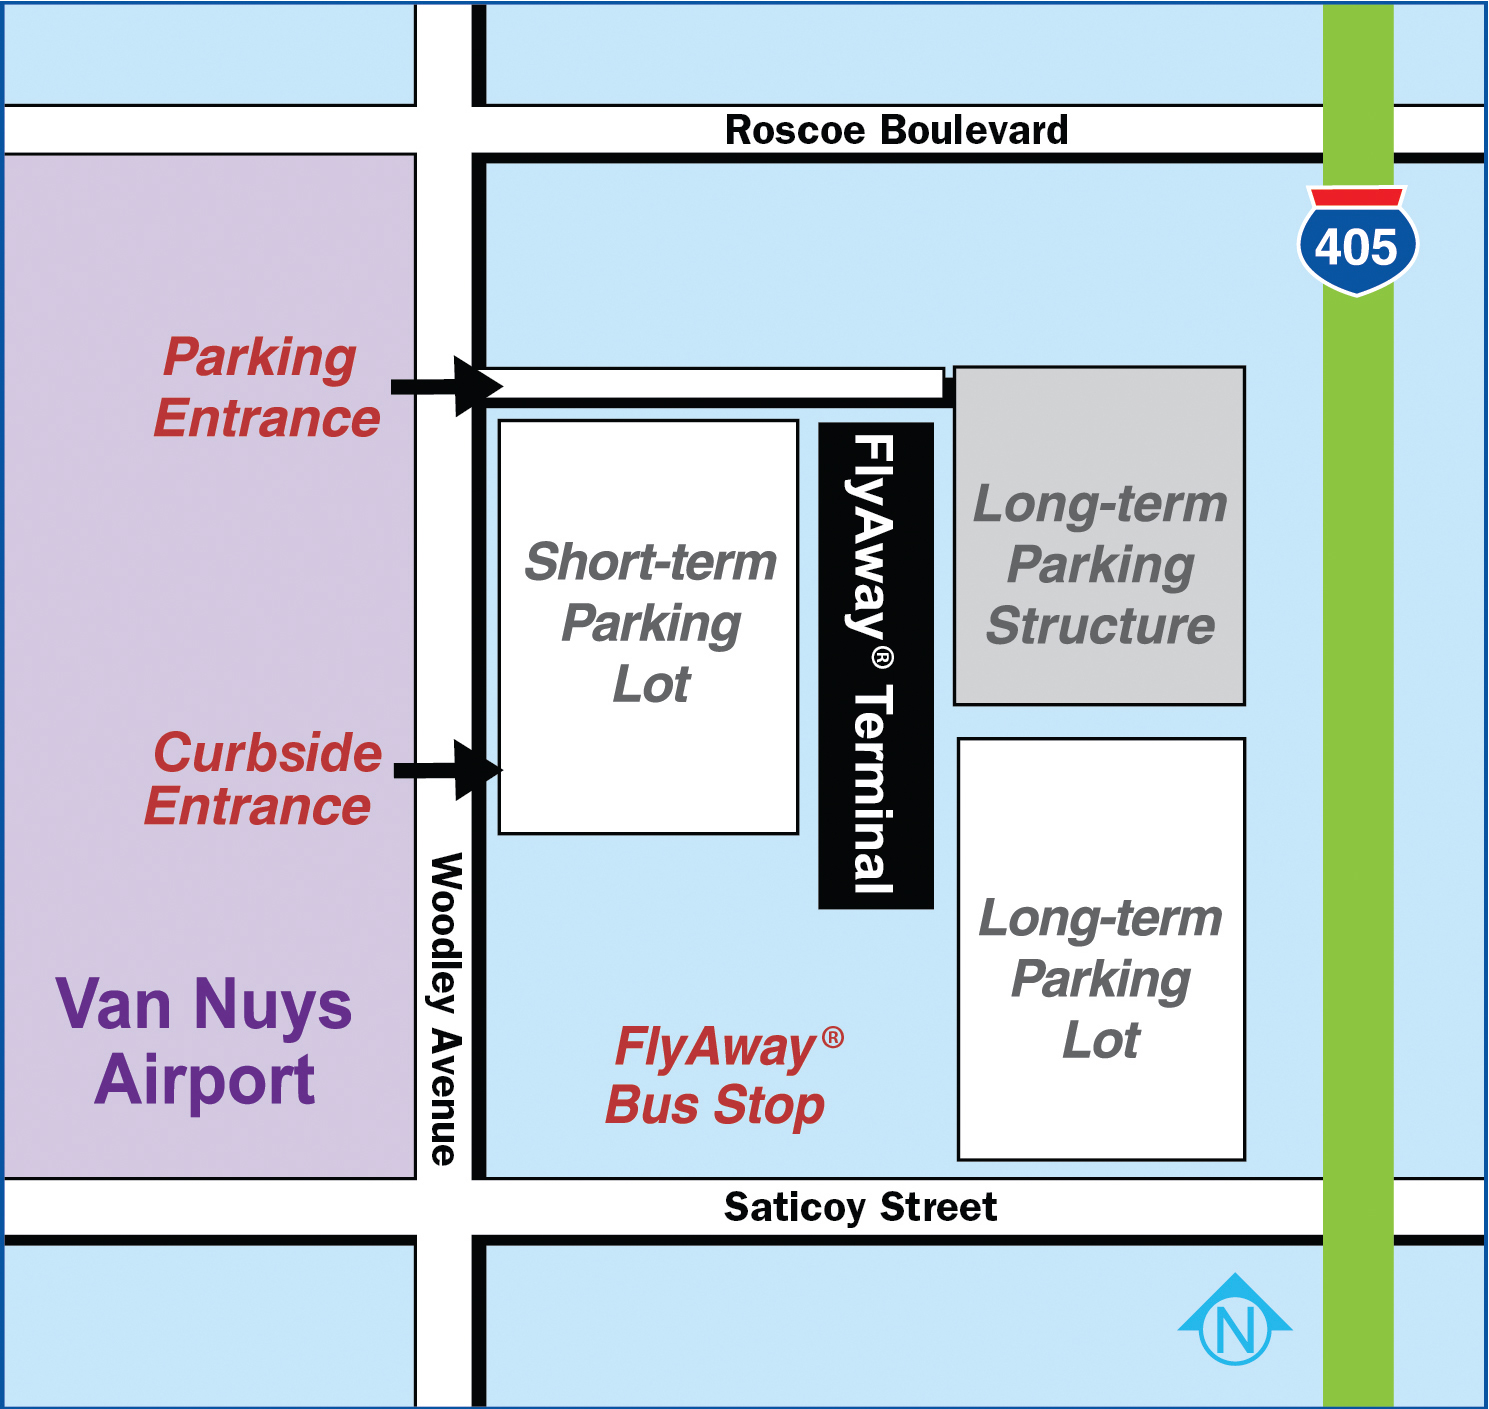 LAX, Terminal and Economy Parking Maps